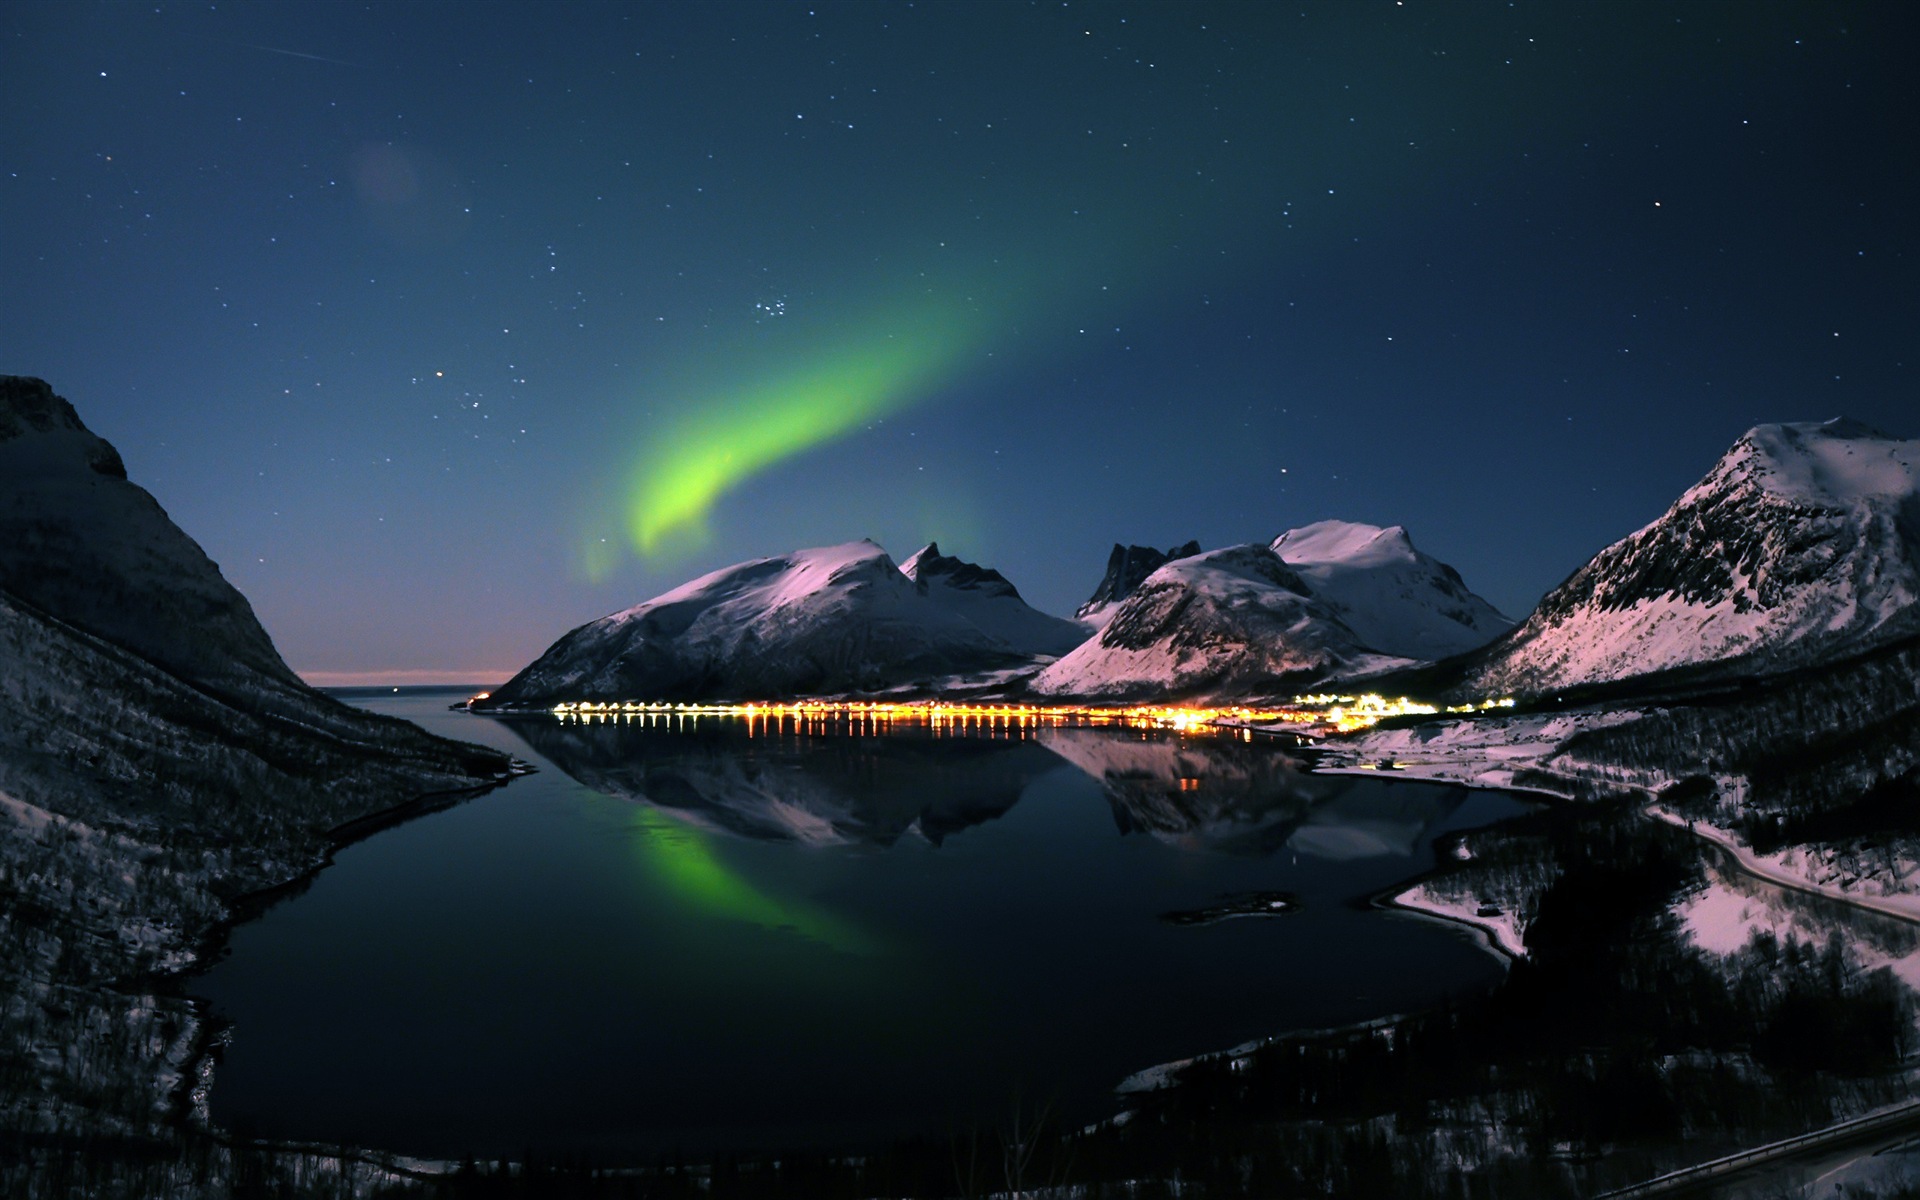 Natural wonders of the Northern Lights HD Wallpaper (2) #2 - 1920x1200